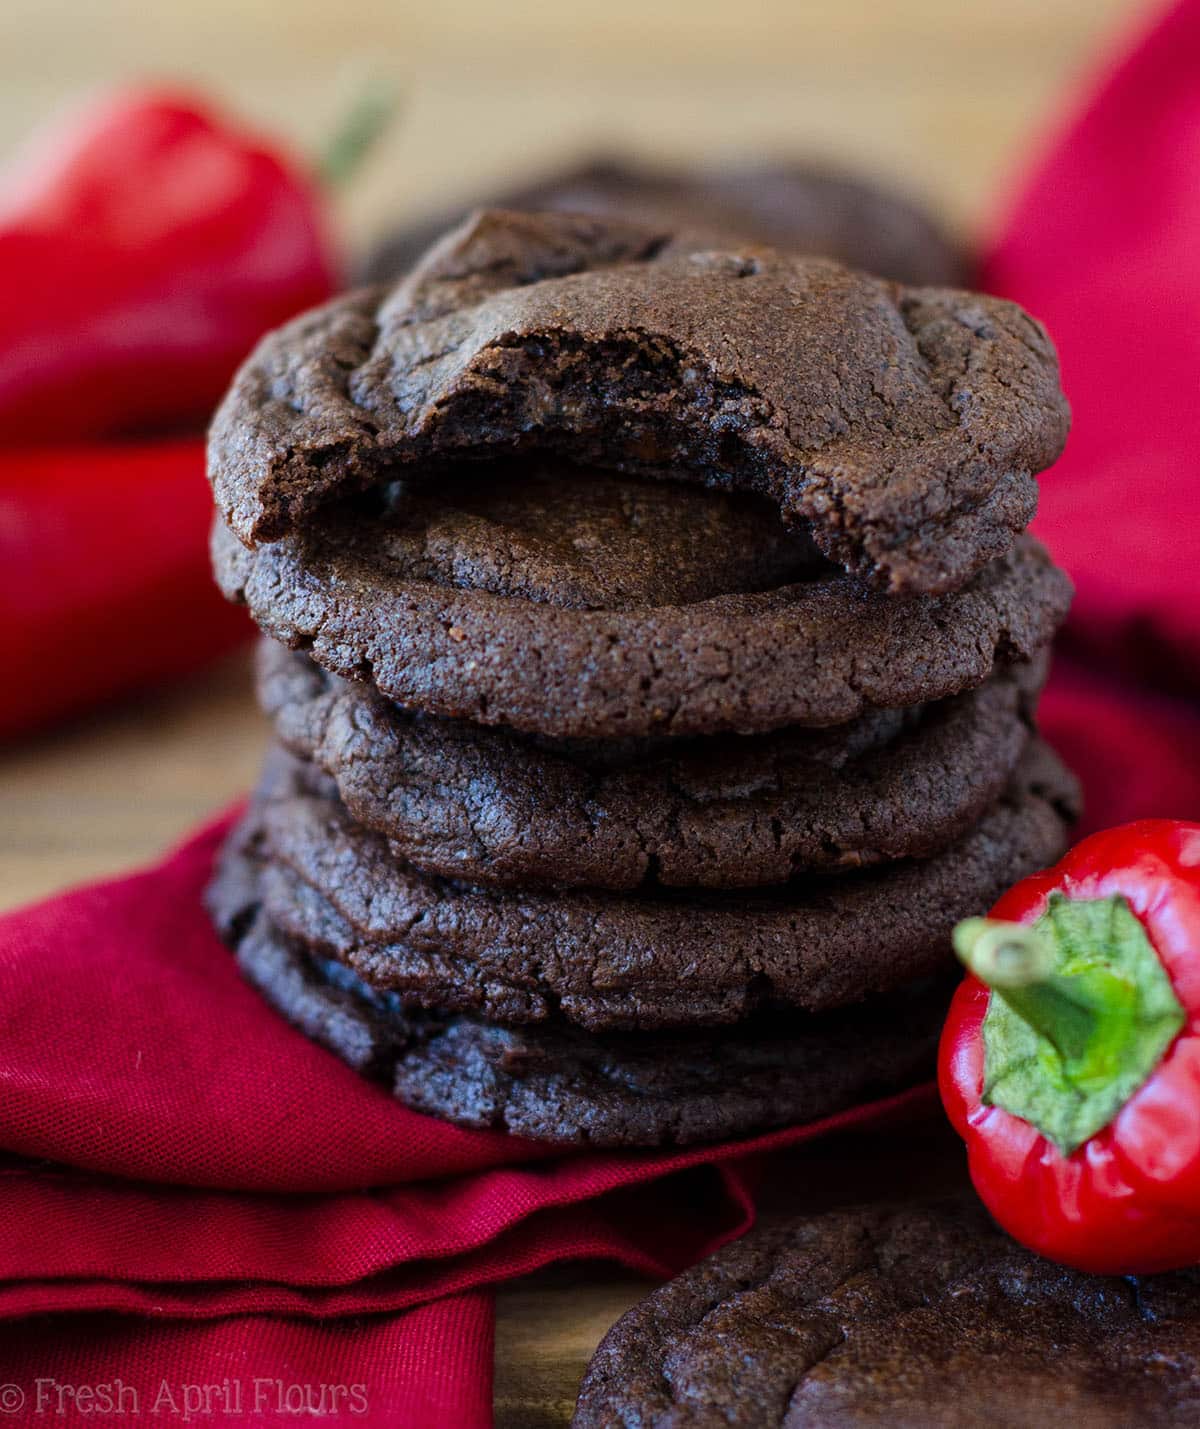 Chocolate Cayenne Cookies: Rich and decadent chocolate cookies spiced with the subtle flavors of cayenne and cinnamon. The perfect cookie for warming your belly and your tastebuds!